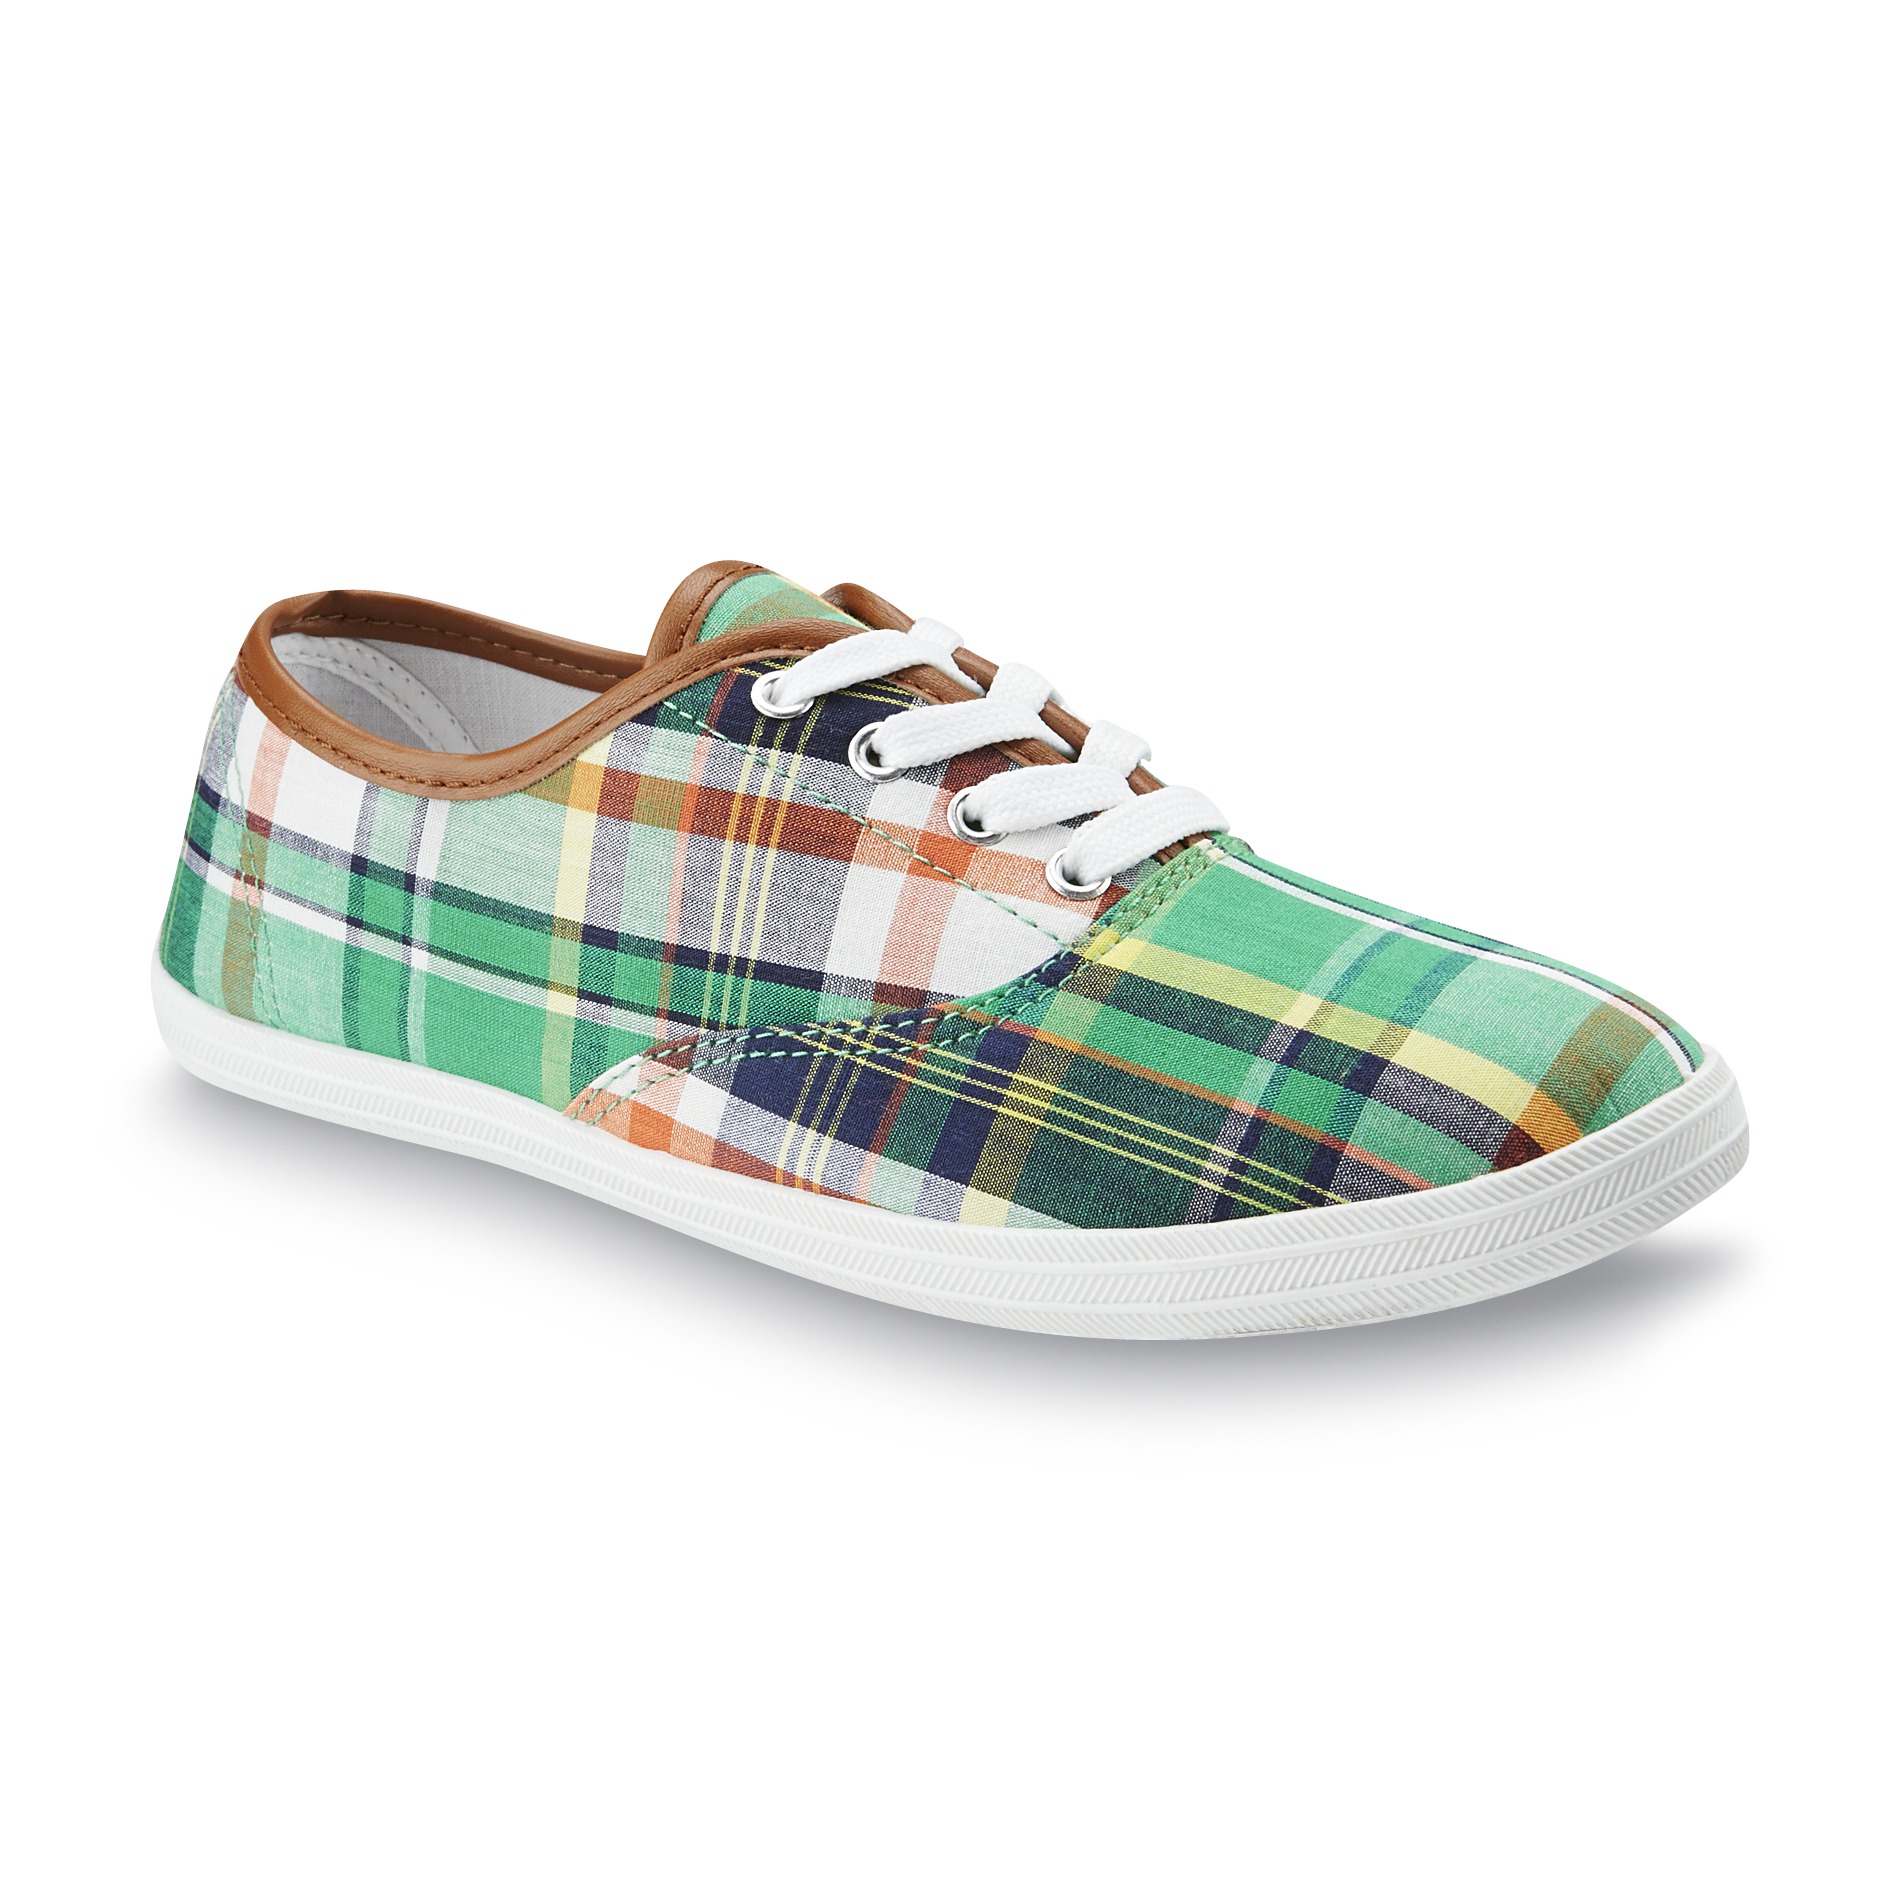 Twisted Women's Tennis Green/Plaid Casual Sneaker Shoes